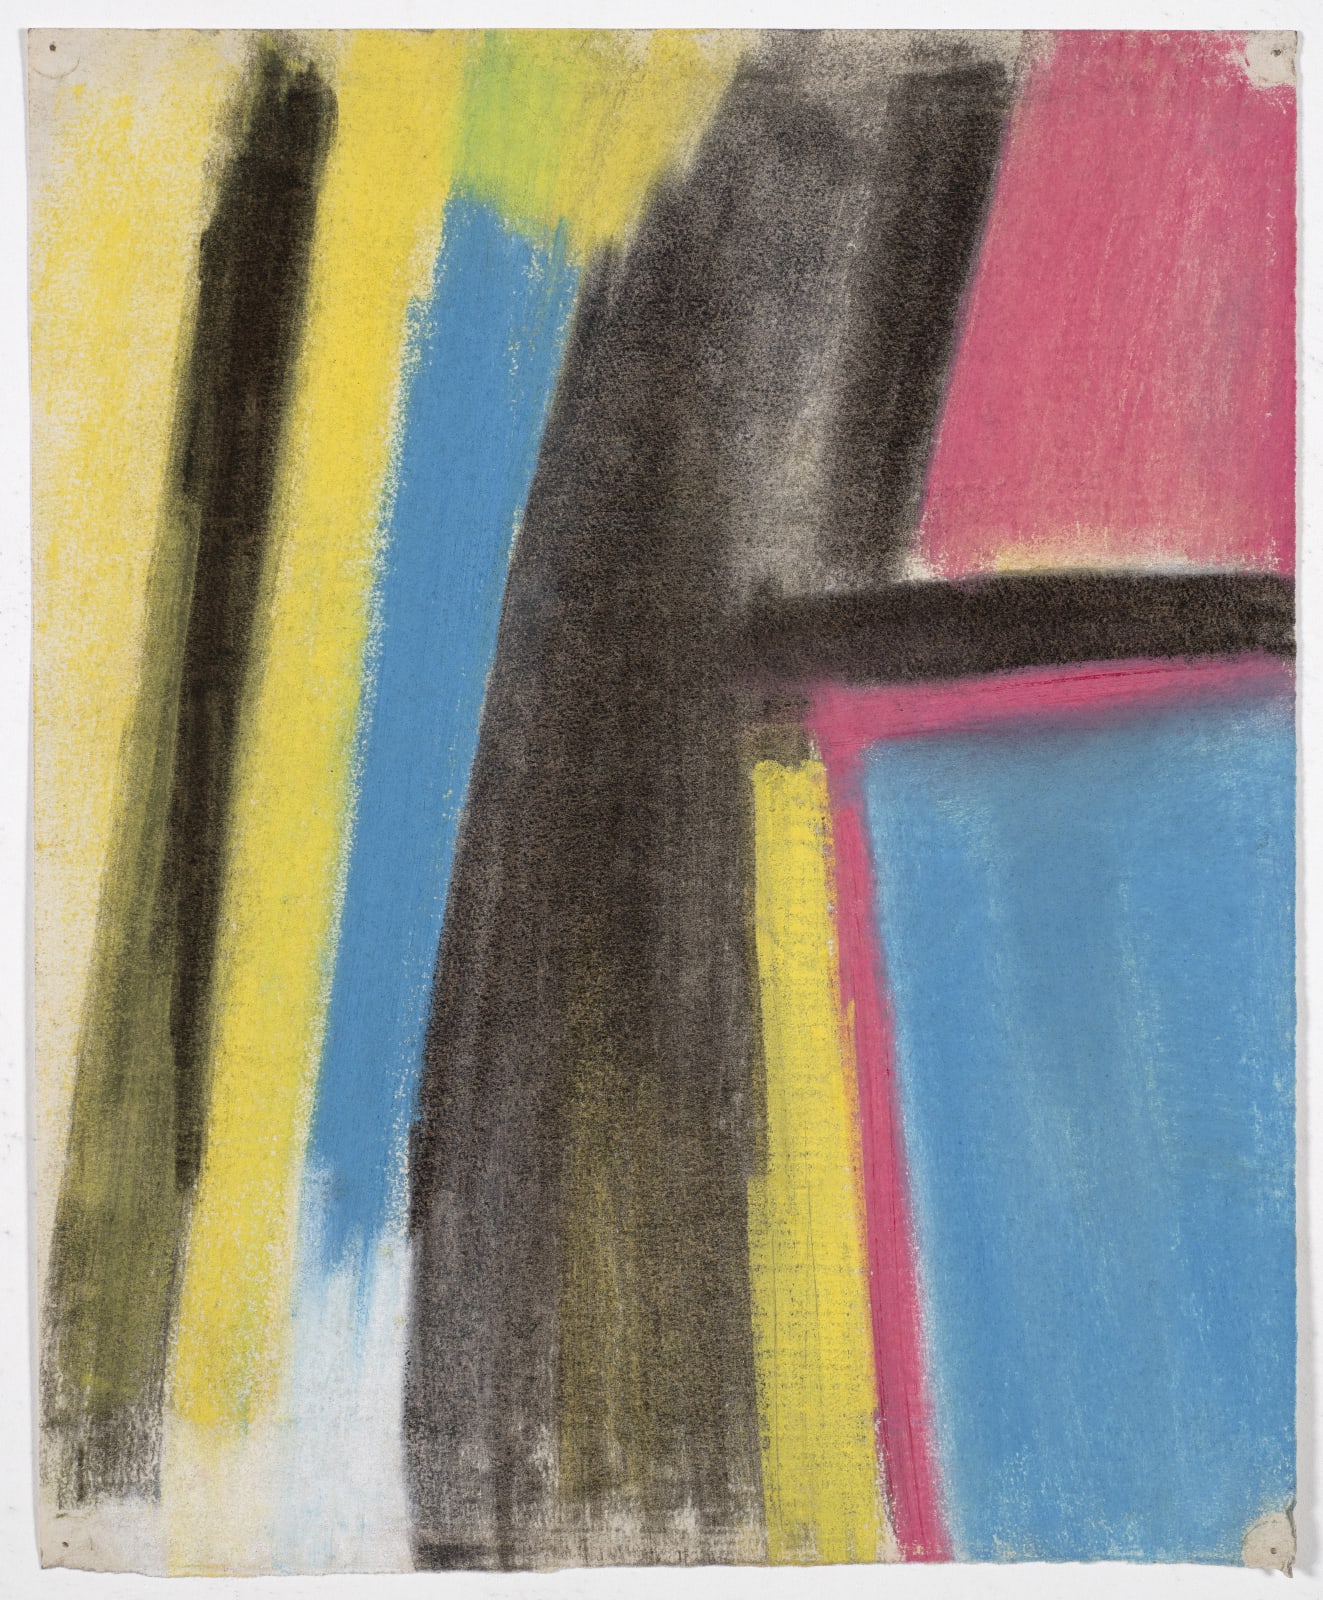 Drawing, c. 1953 Coloured chalk on paper 35 x 28cm The Gustav Metzger Foundation